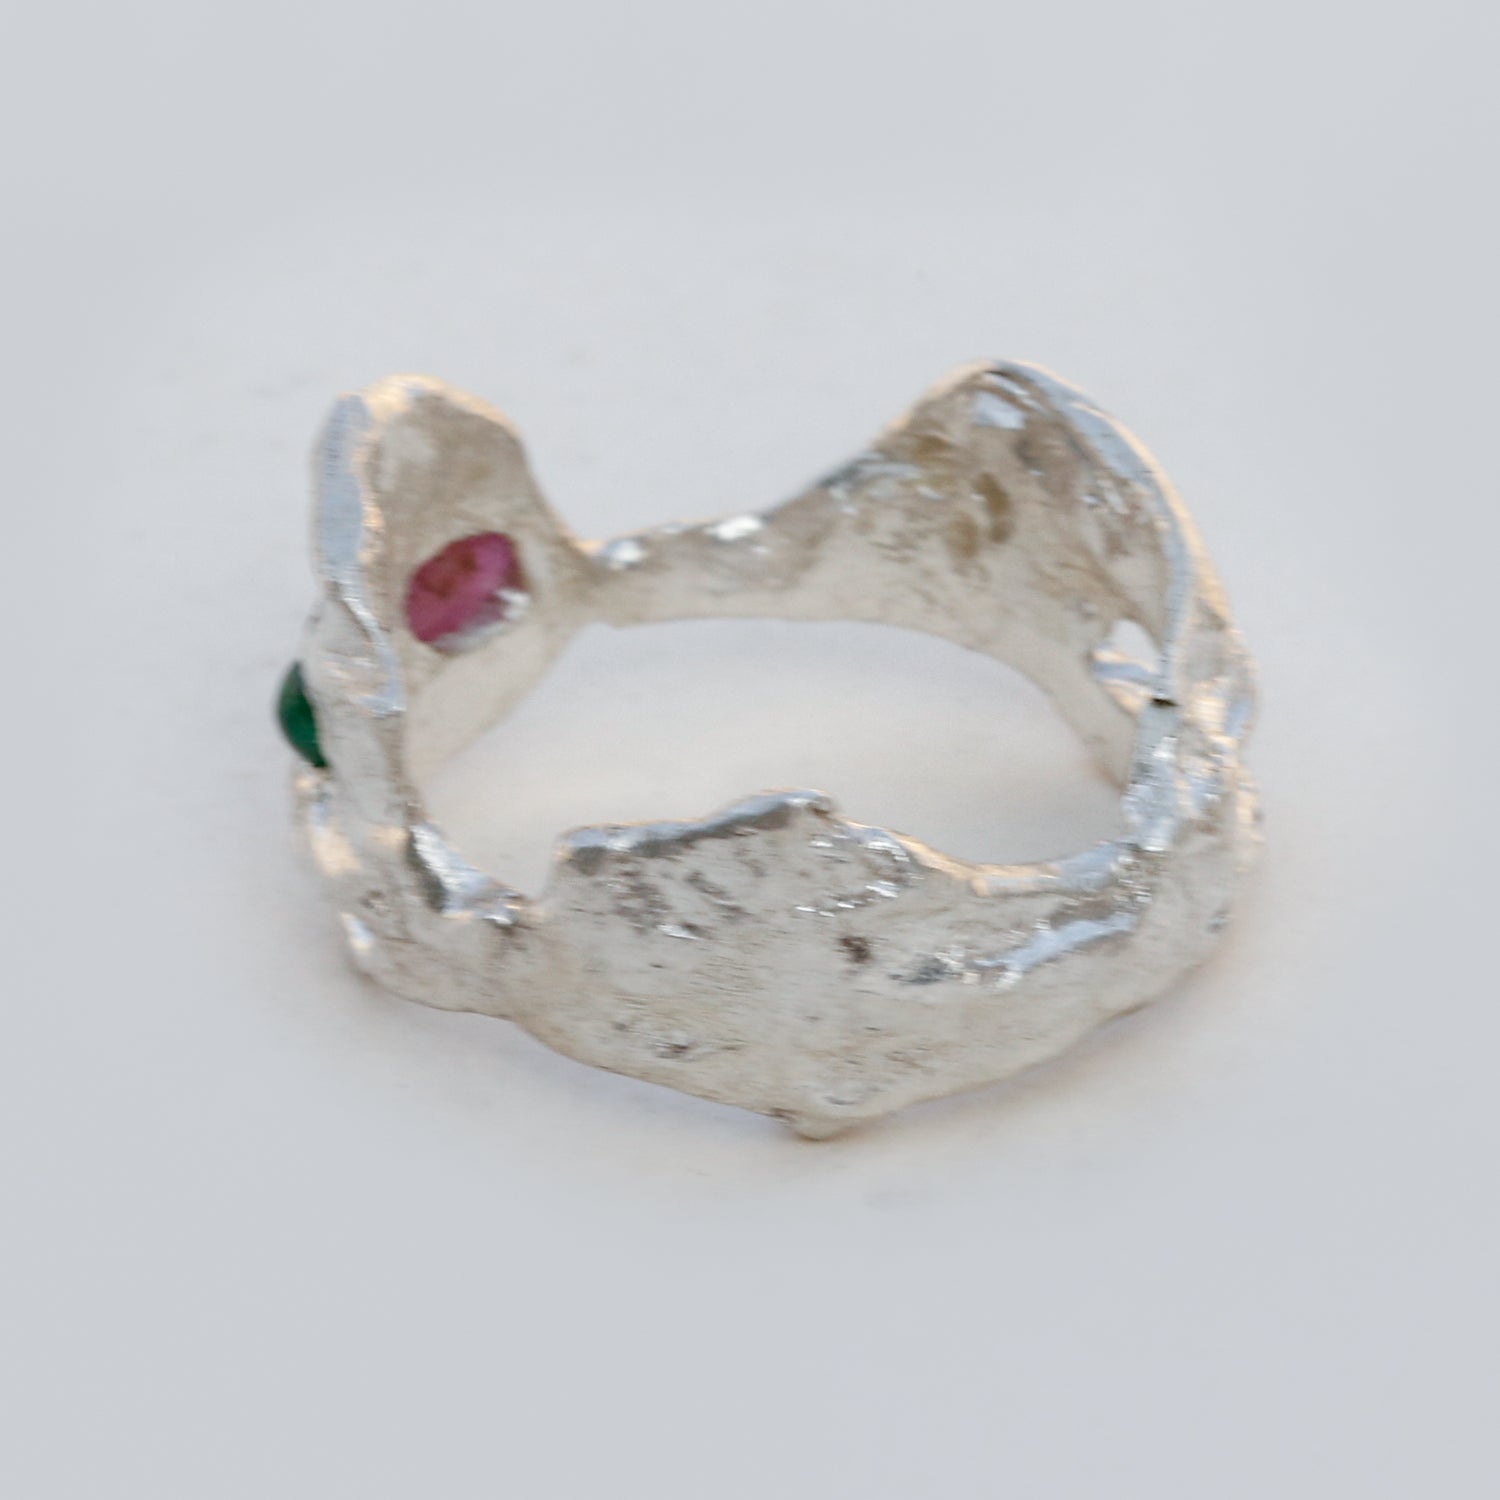 Simper Emerald and Ruby Ring